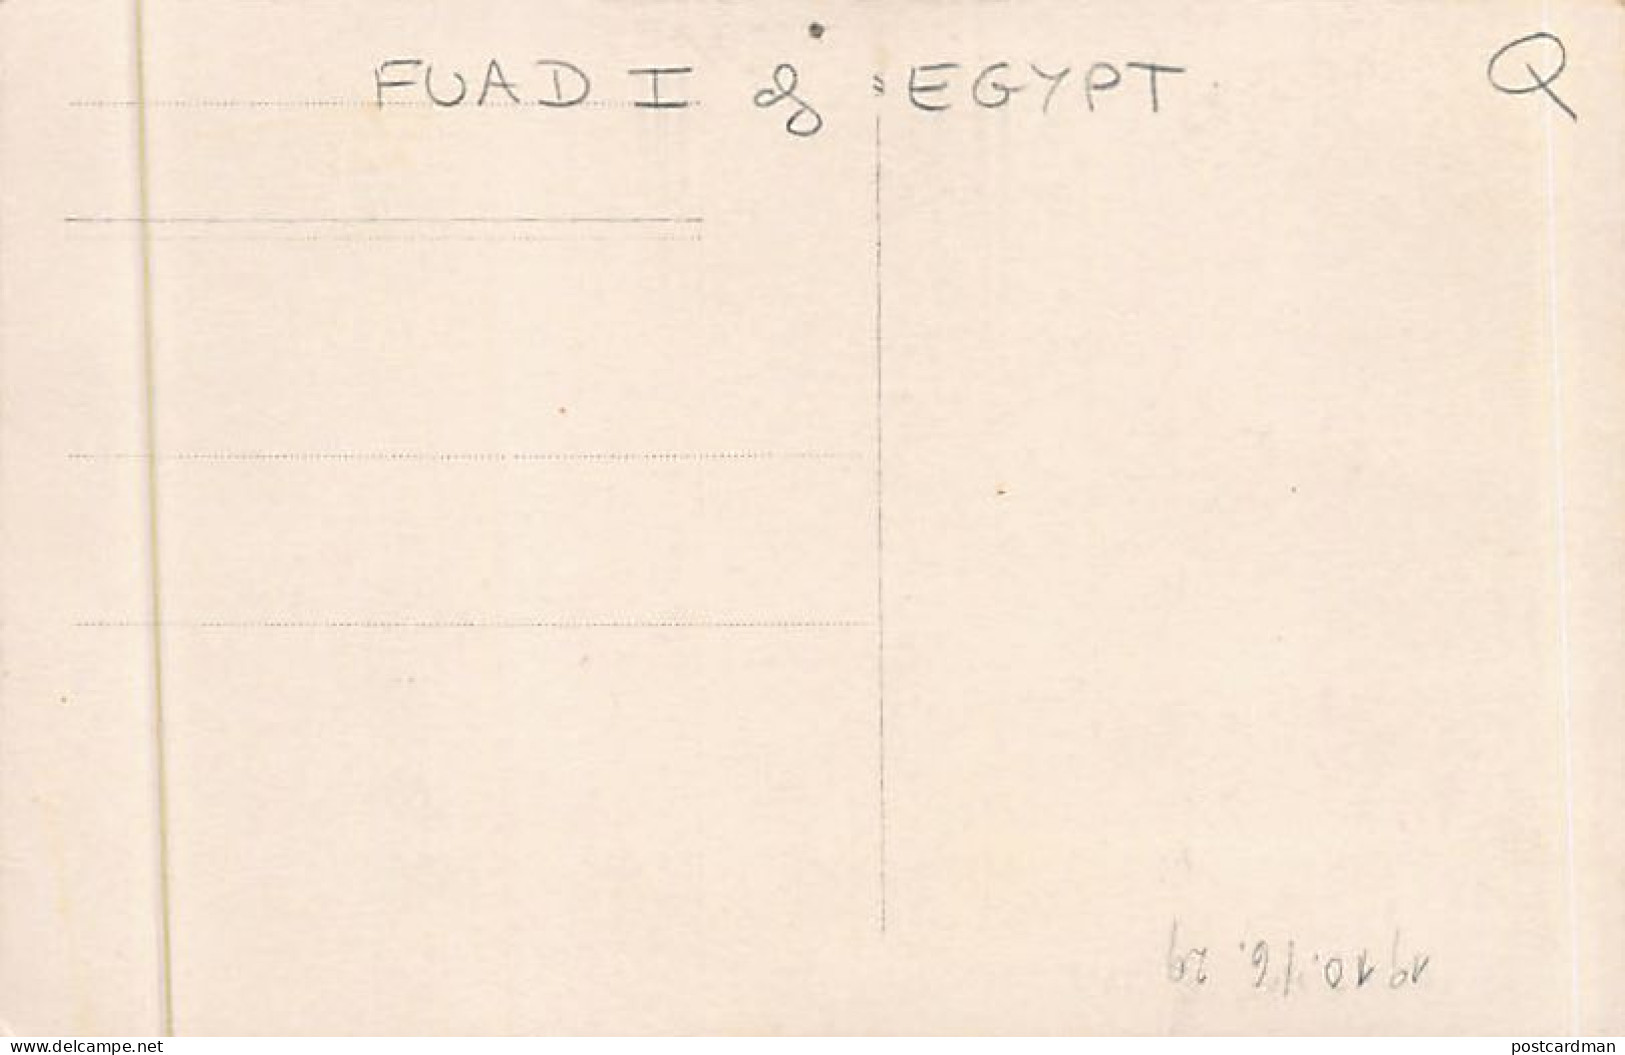 Egypt - King Fuad I On 16 October 1929 - REAL PHOTO - Publ. Unknown  - Persone